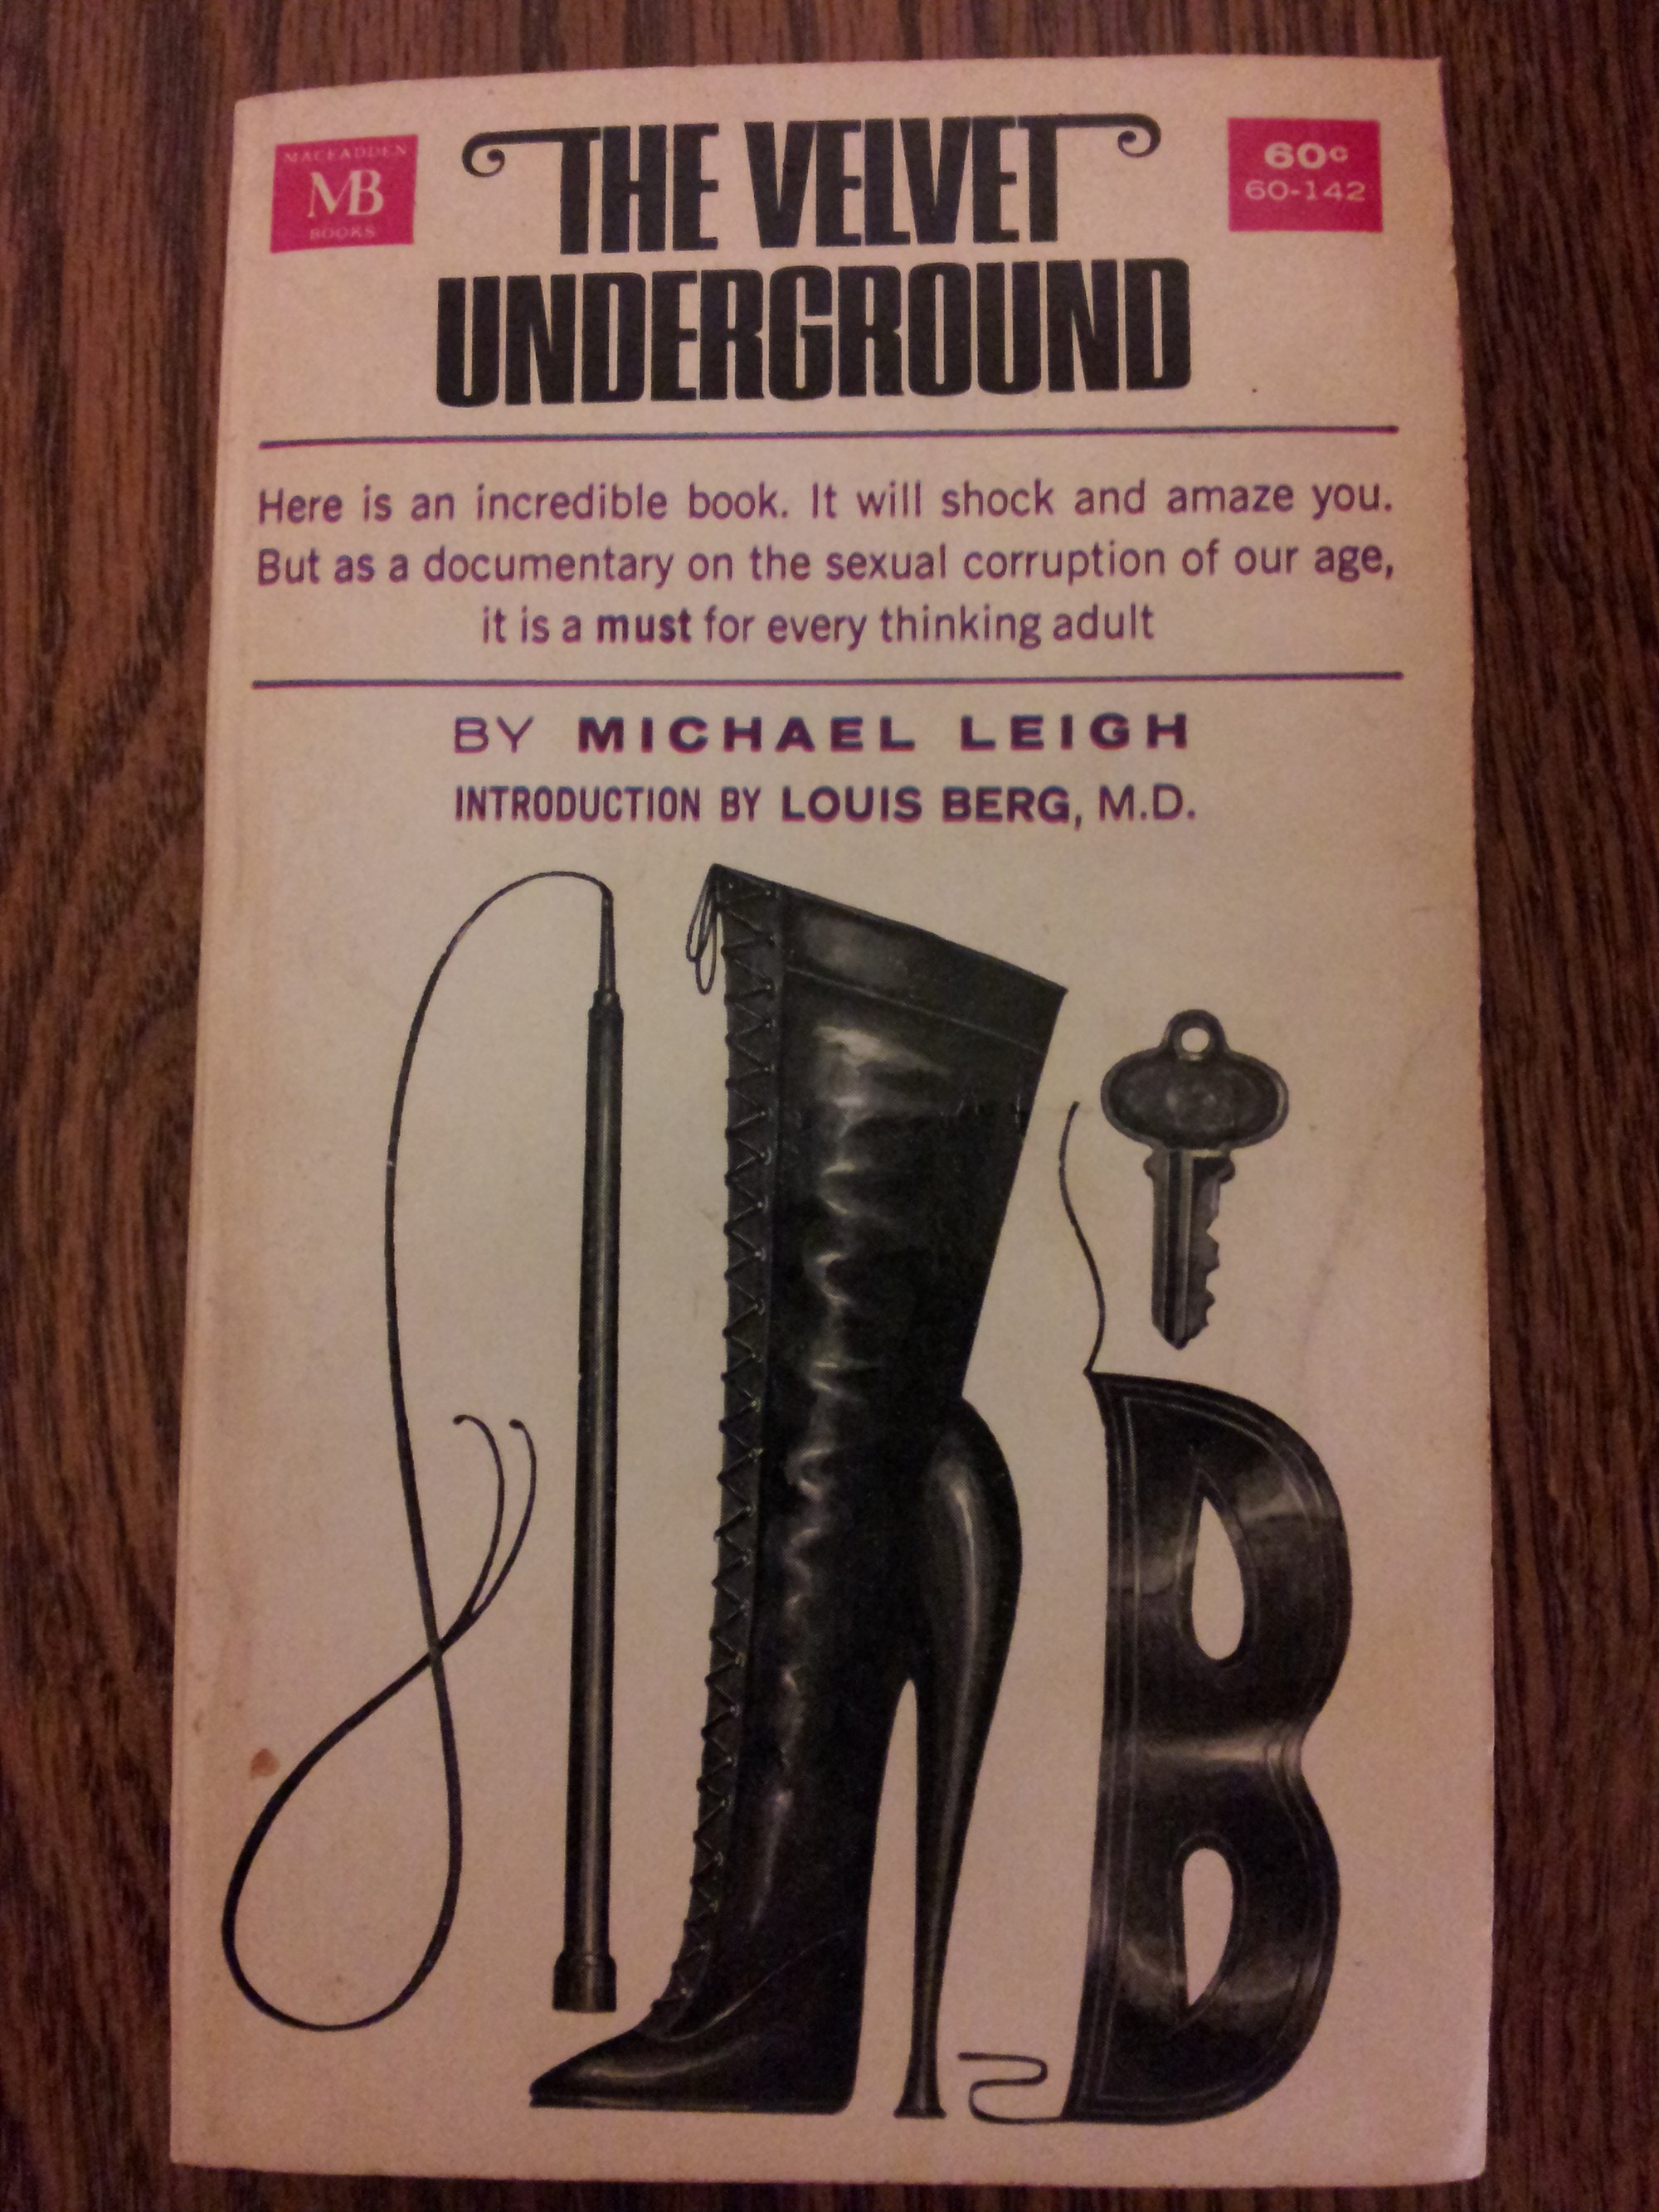 Tony Conrad reportedly introduced Cale and Lou Reed to a book called The Velvet Underground, a paperback by journalist Michael Leigh, published in September 1963, that reports on paraphilia in the USA.